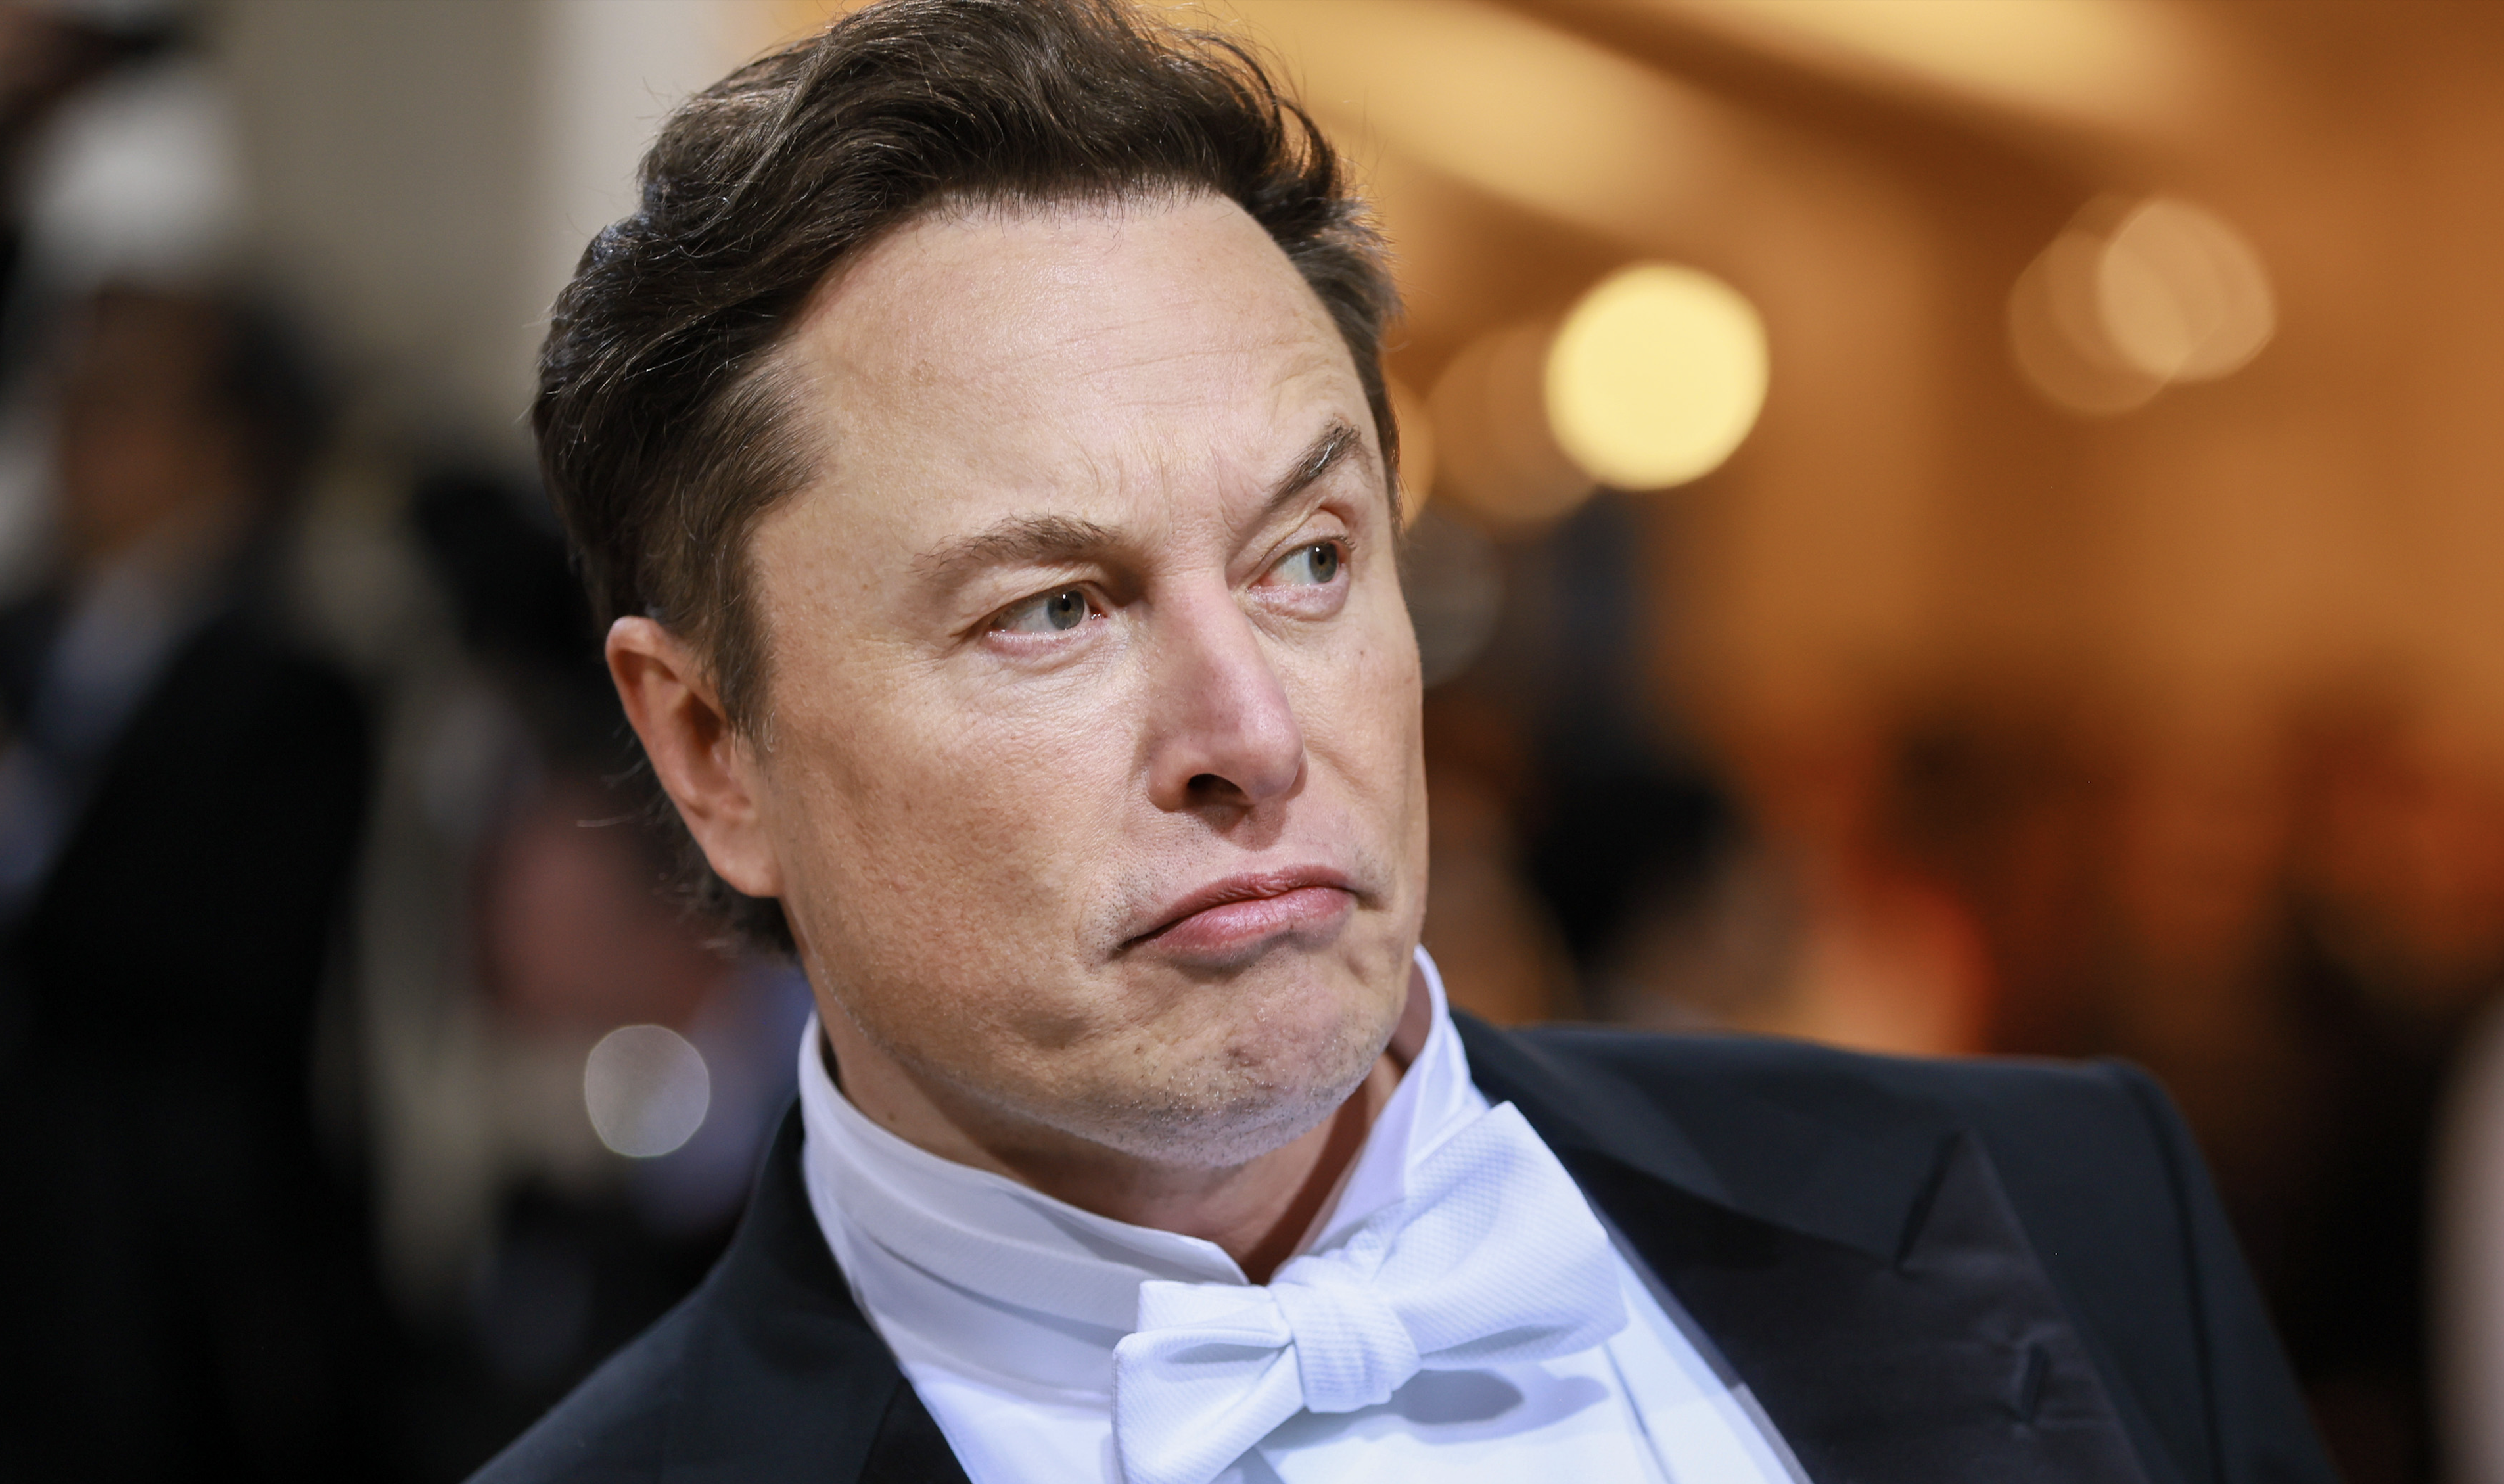 ‘Prison For Life’: Elon Musk Sounds Off On Parents And Doctors Who Sterilize Minors